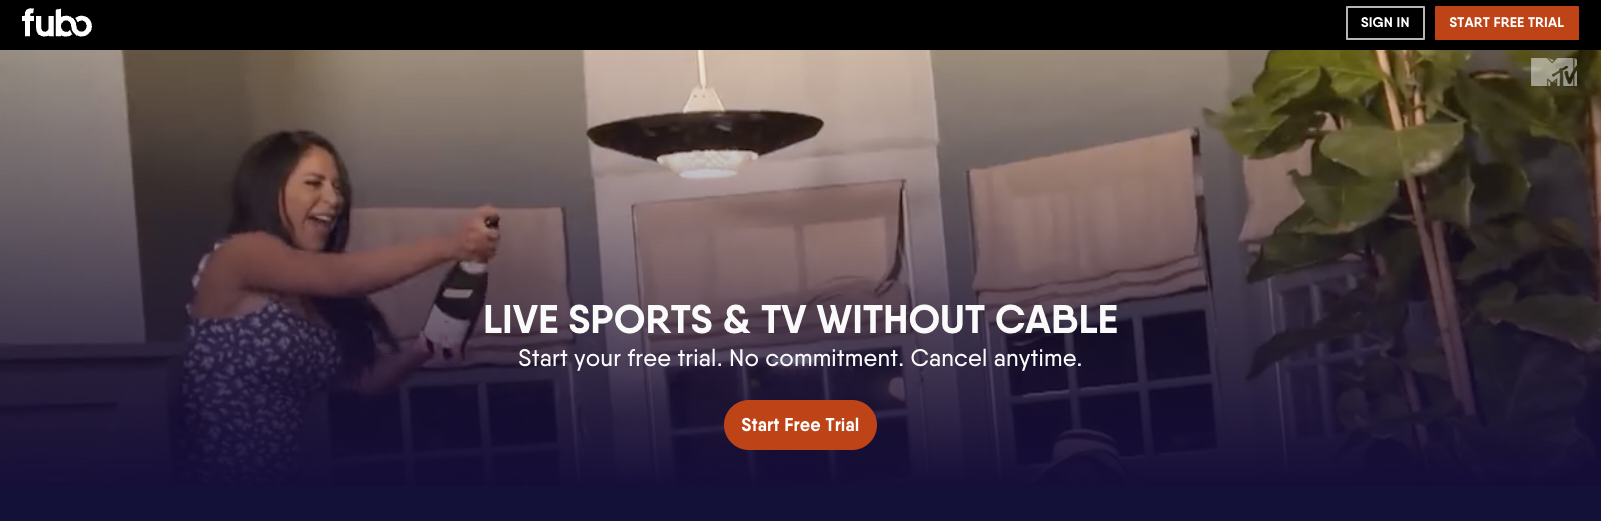 fuboTV is one of the most popular paid legal IPTV providers among sports fans and cord-cutters around the globe.